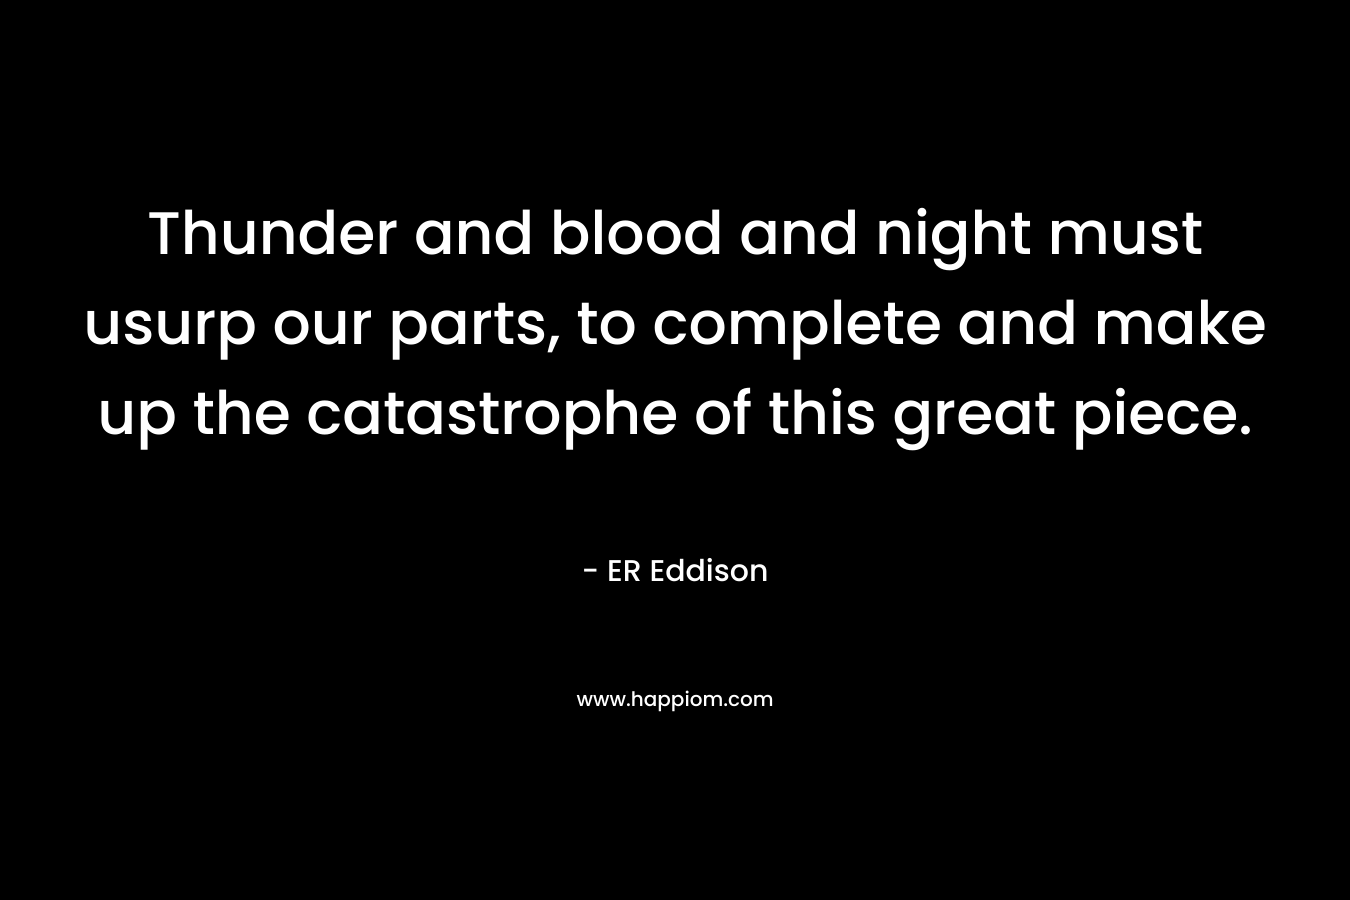 Thunder and blood and night must usurp our parts, to complete and make up the catastrophe of this great piece. – ER Eddison